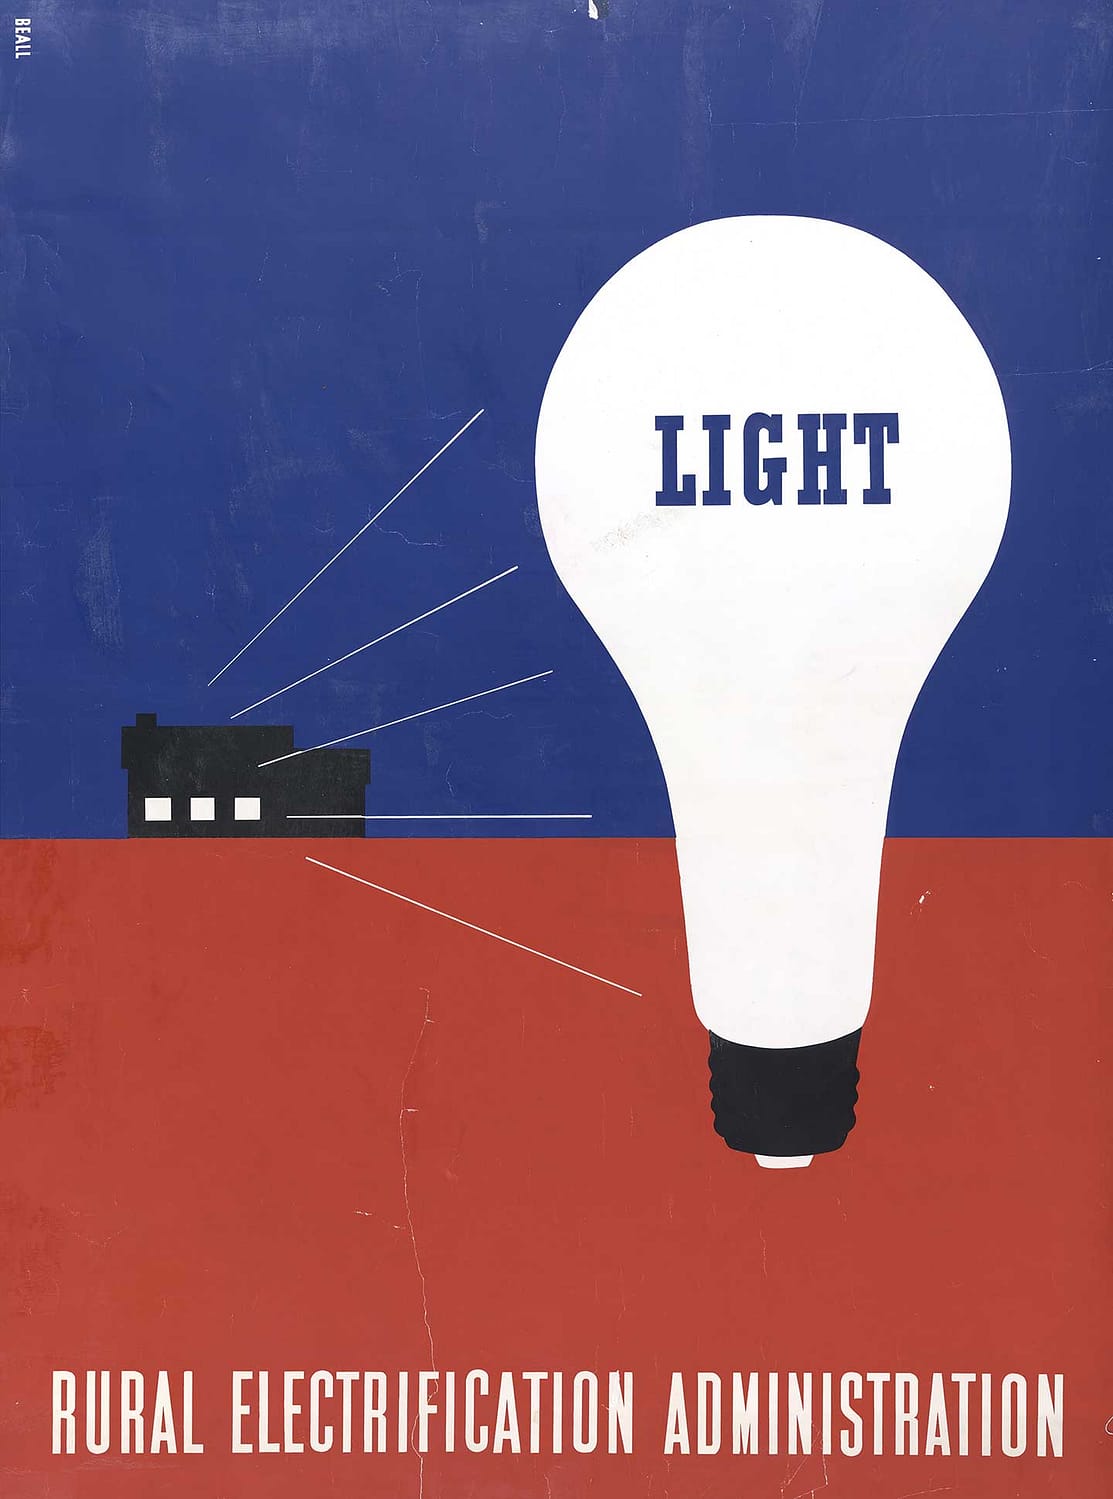 Poster shows a large, white lightbulb labeled "Light" and a farmhouse with light beaming from its windows.